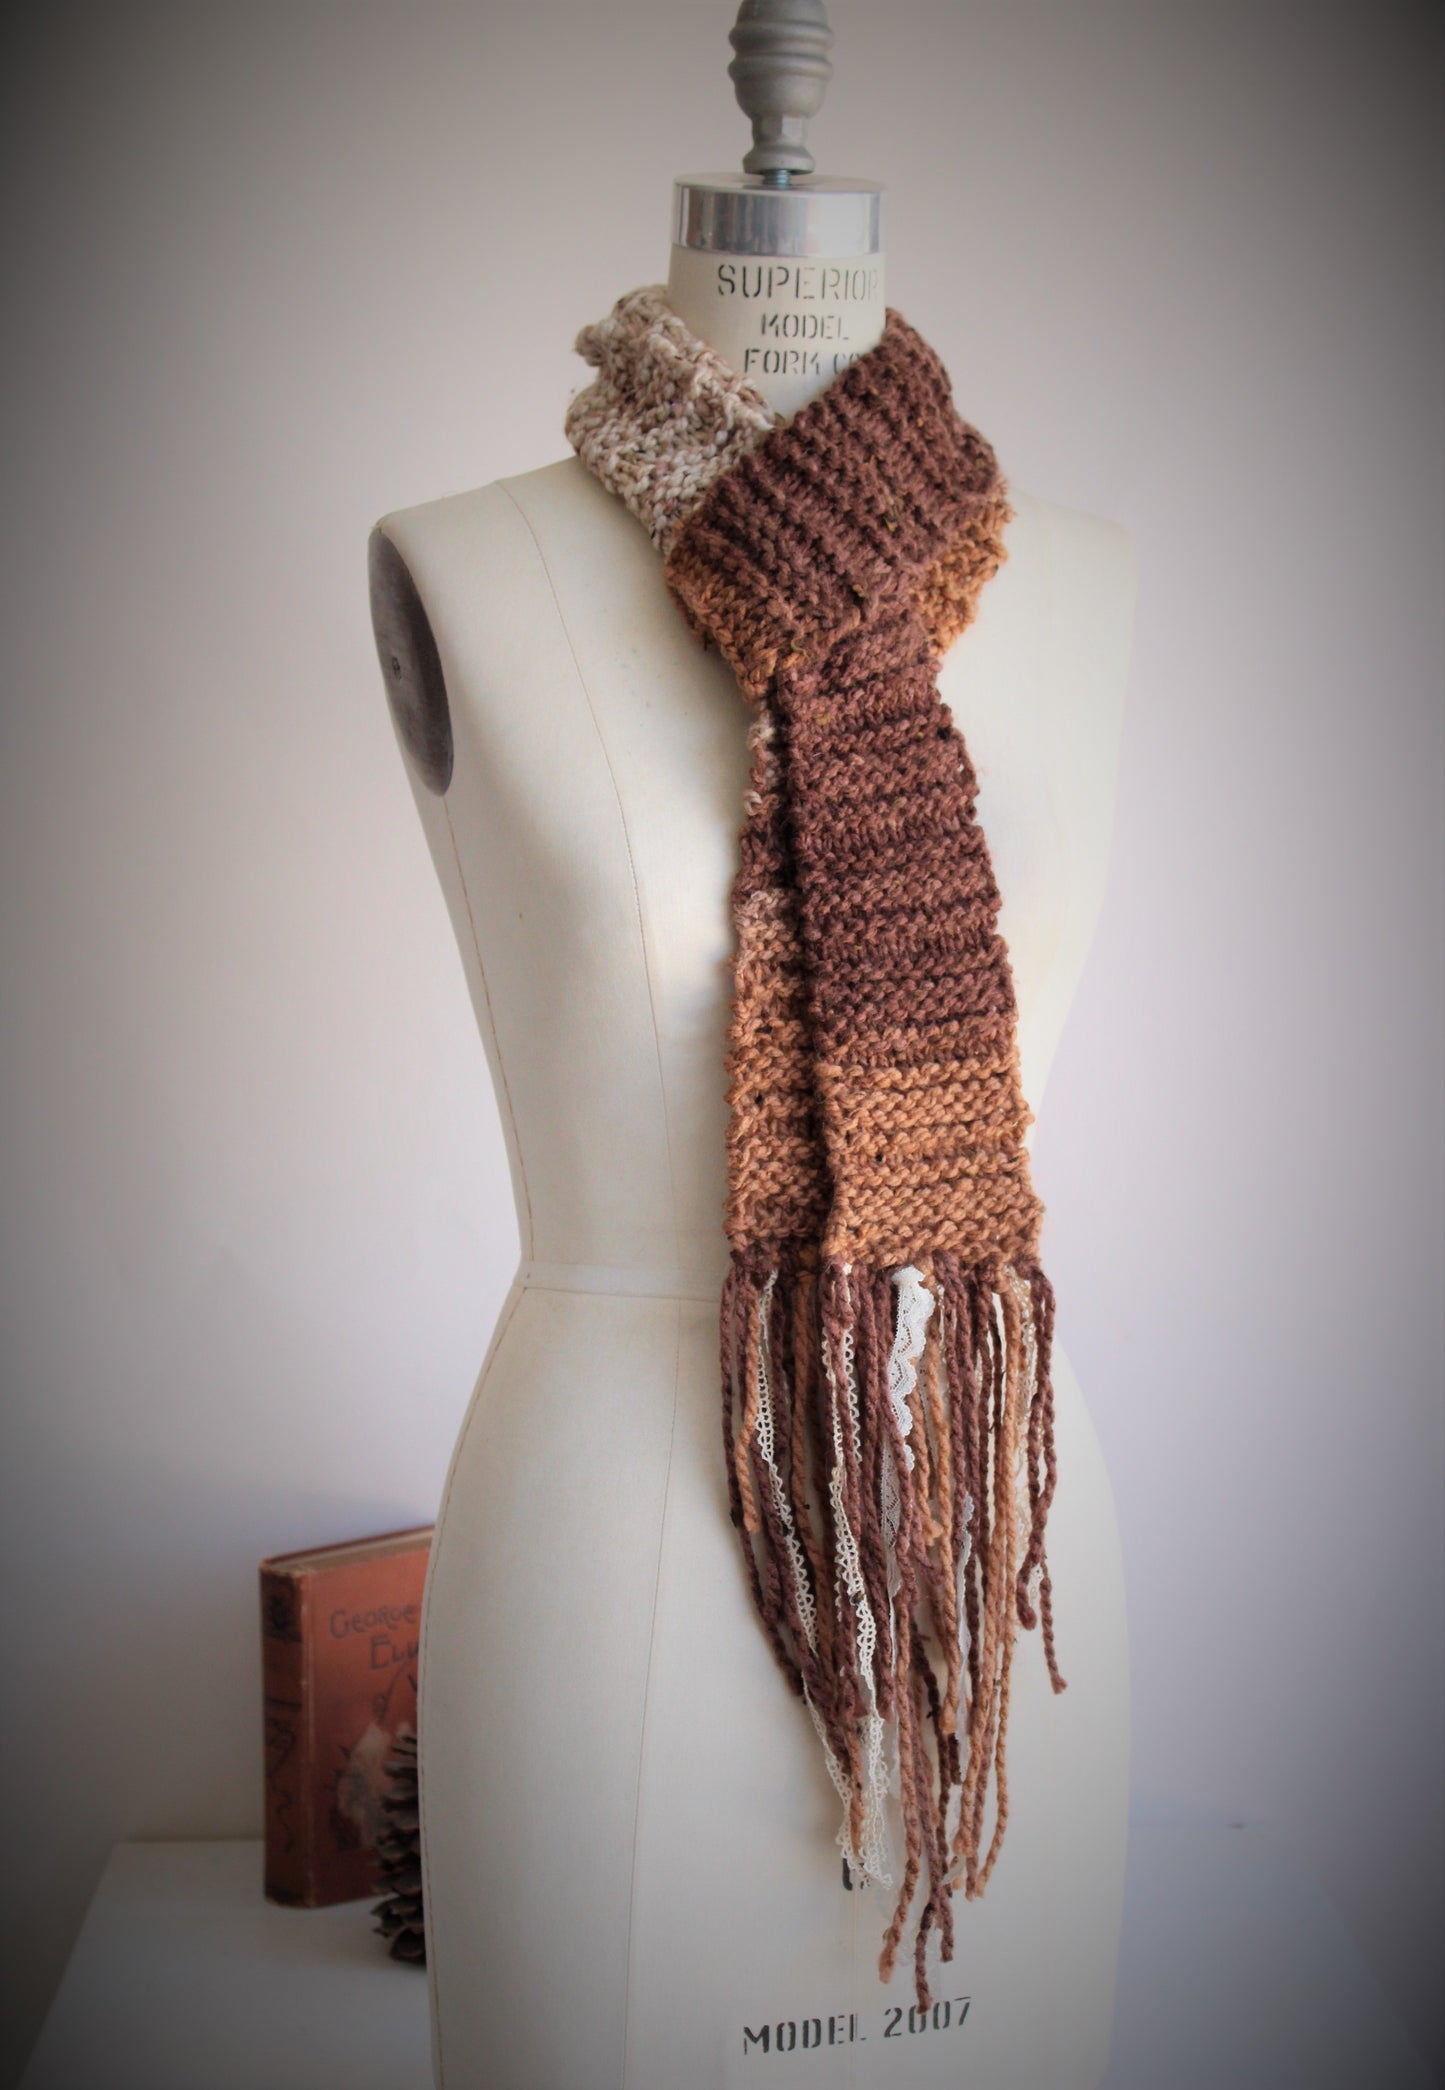 The "Autumn Tree" Knit Scarf with Vintage Lace Fringe